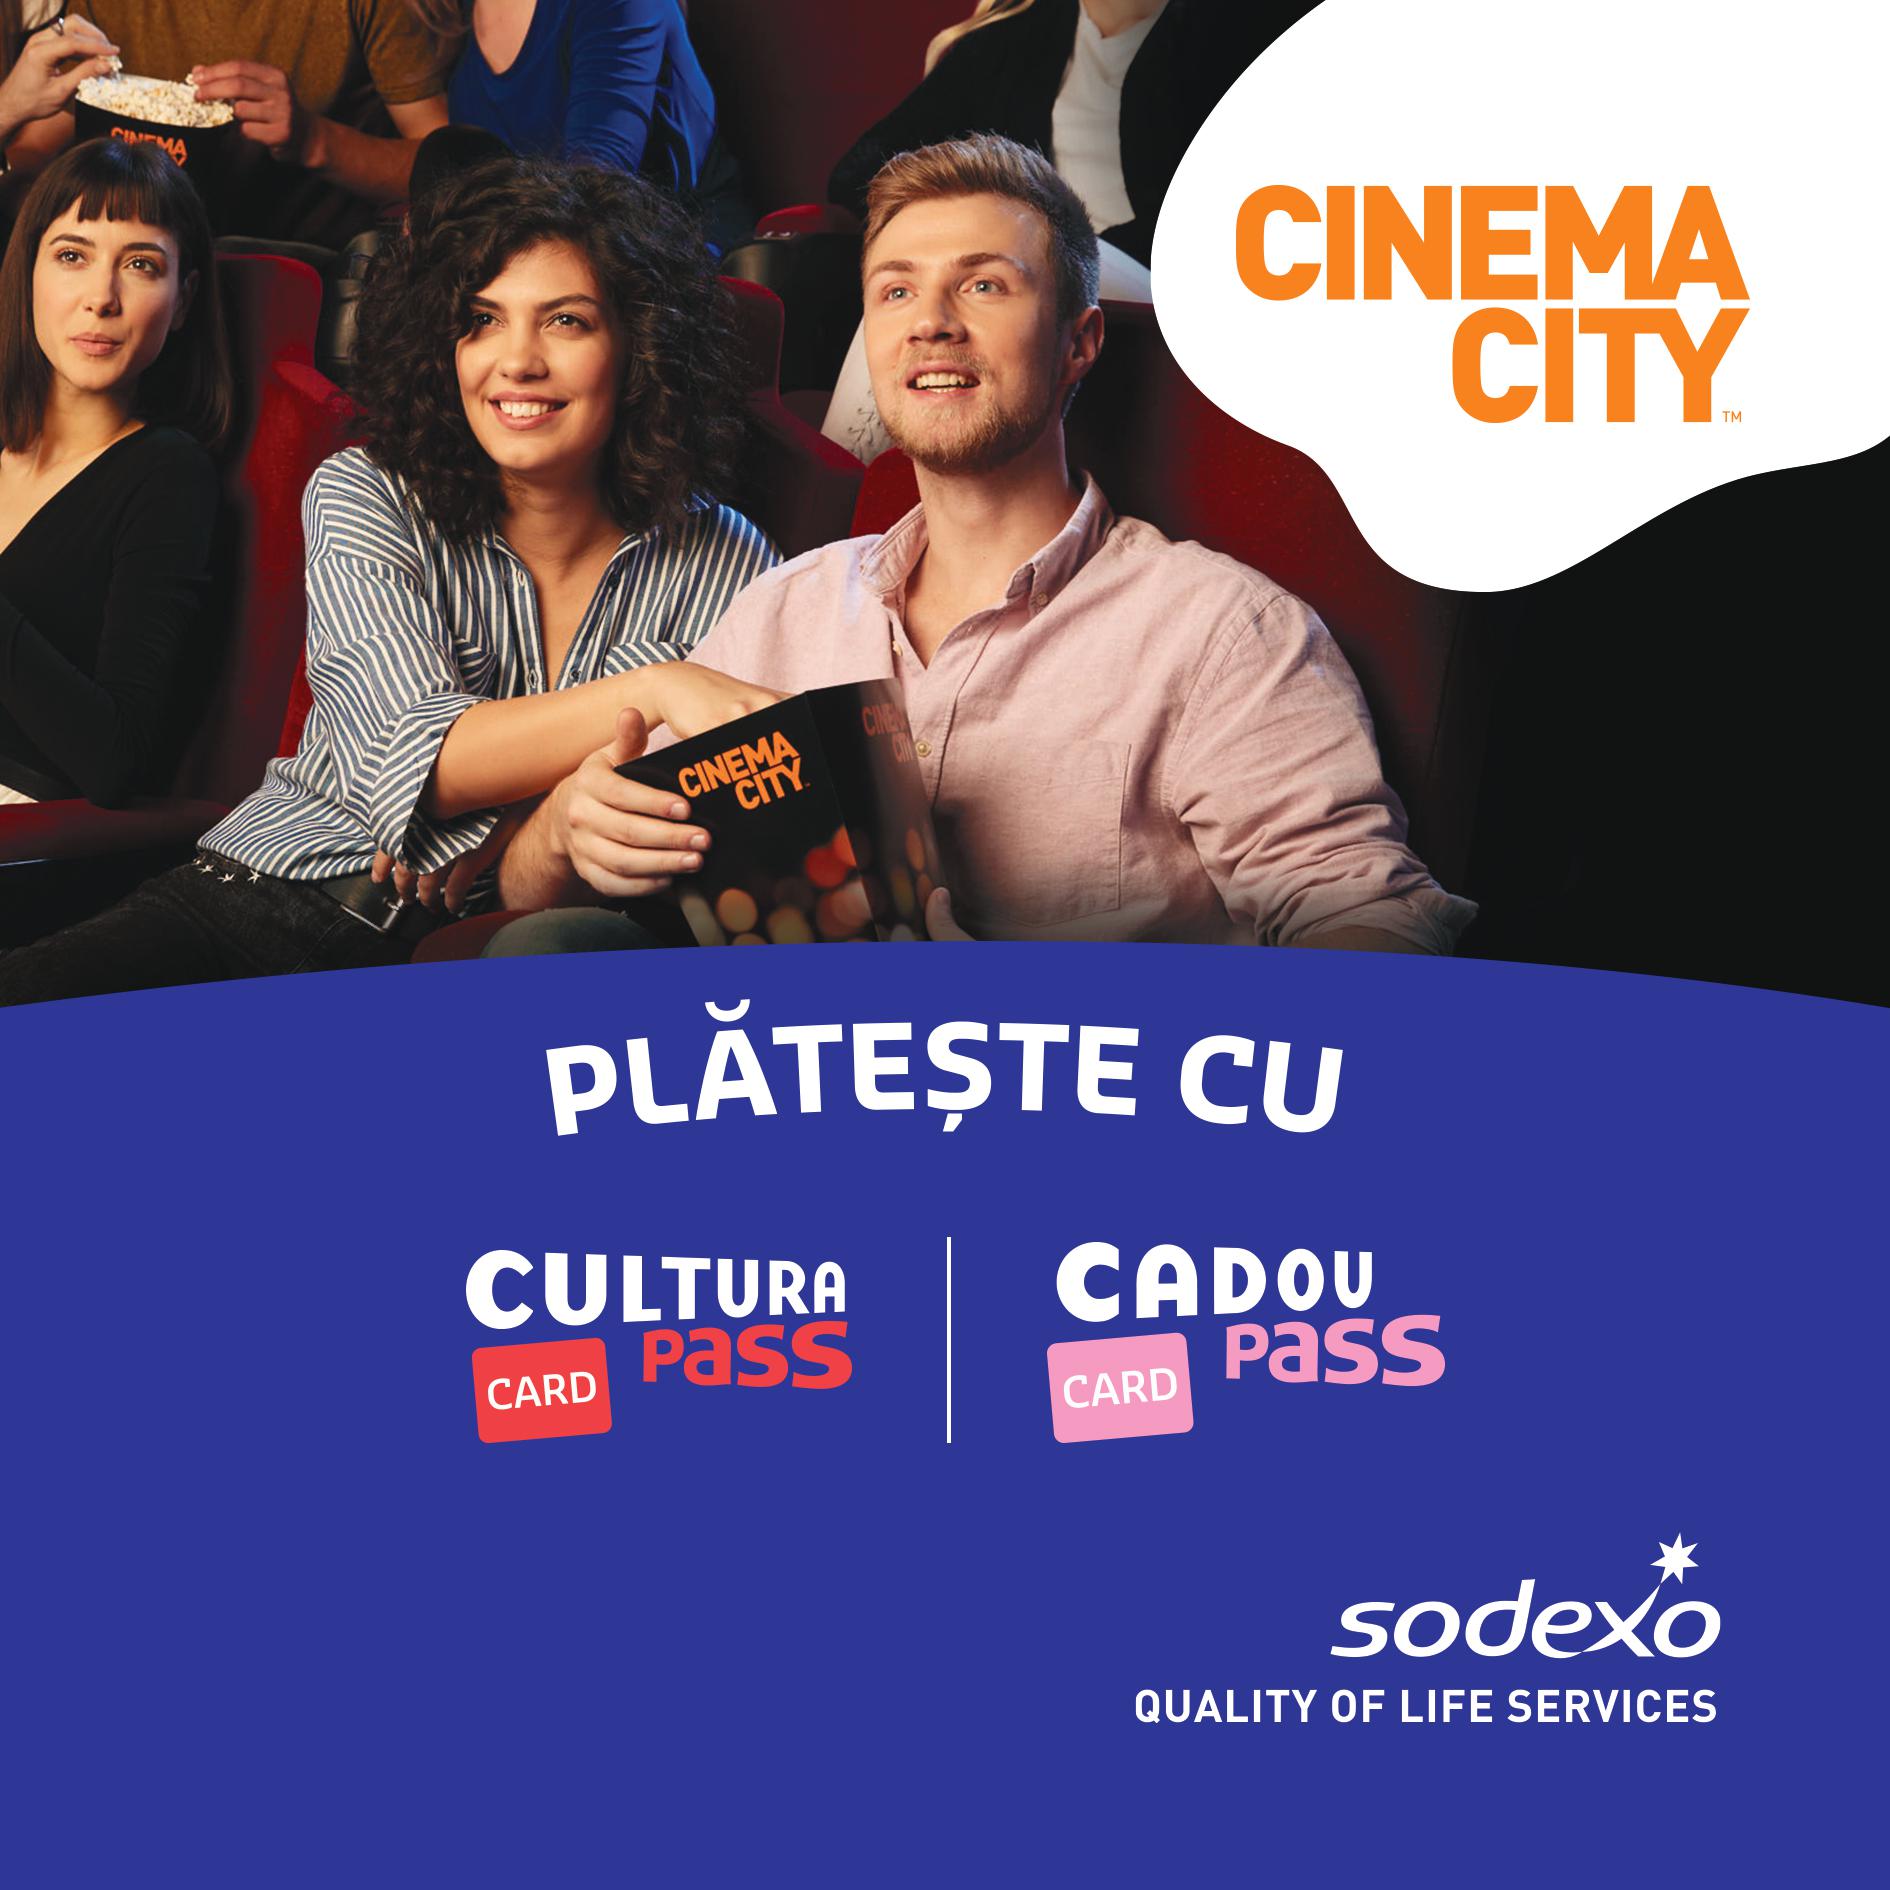 Sodexo Payments in Cinema City